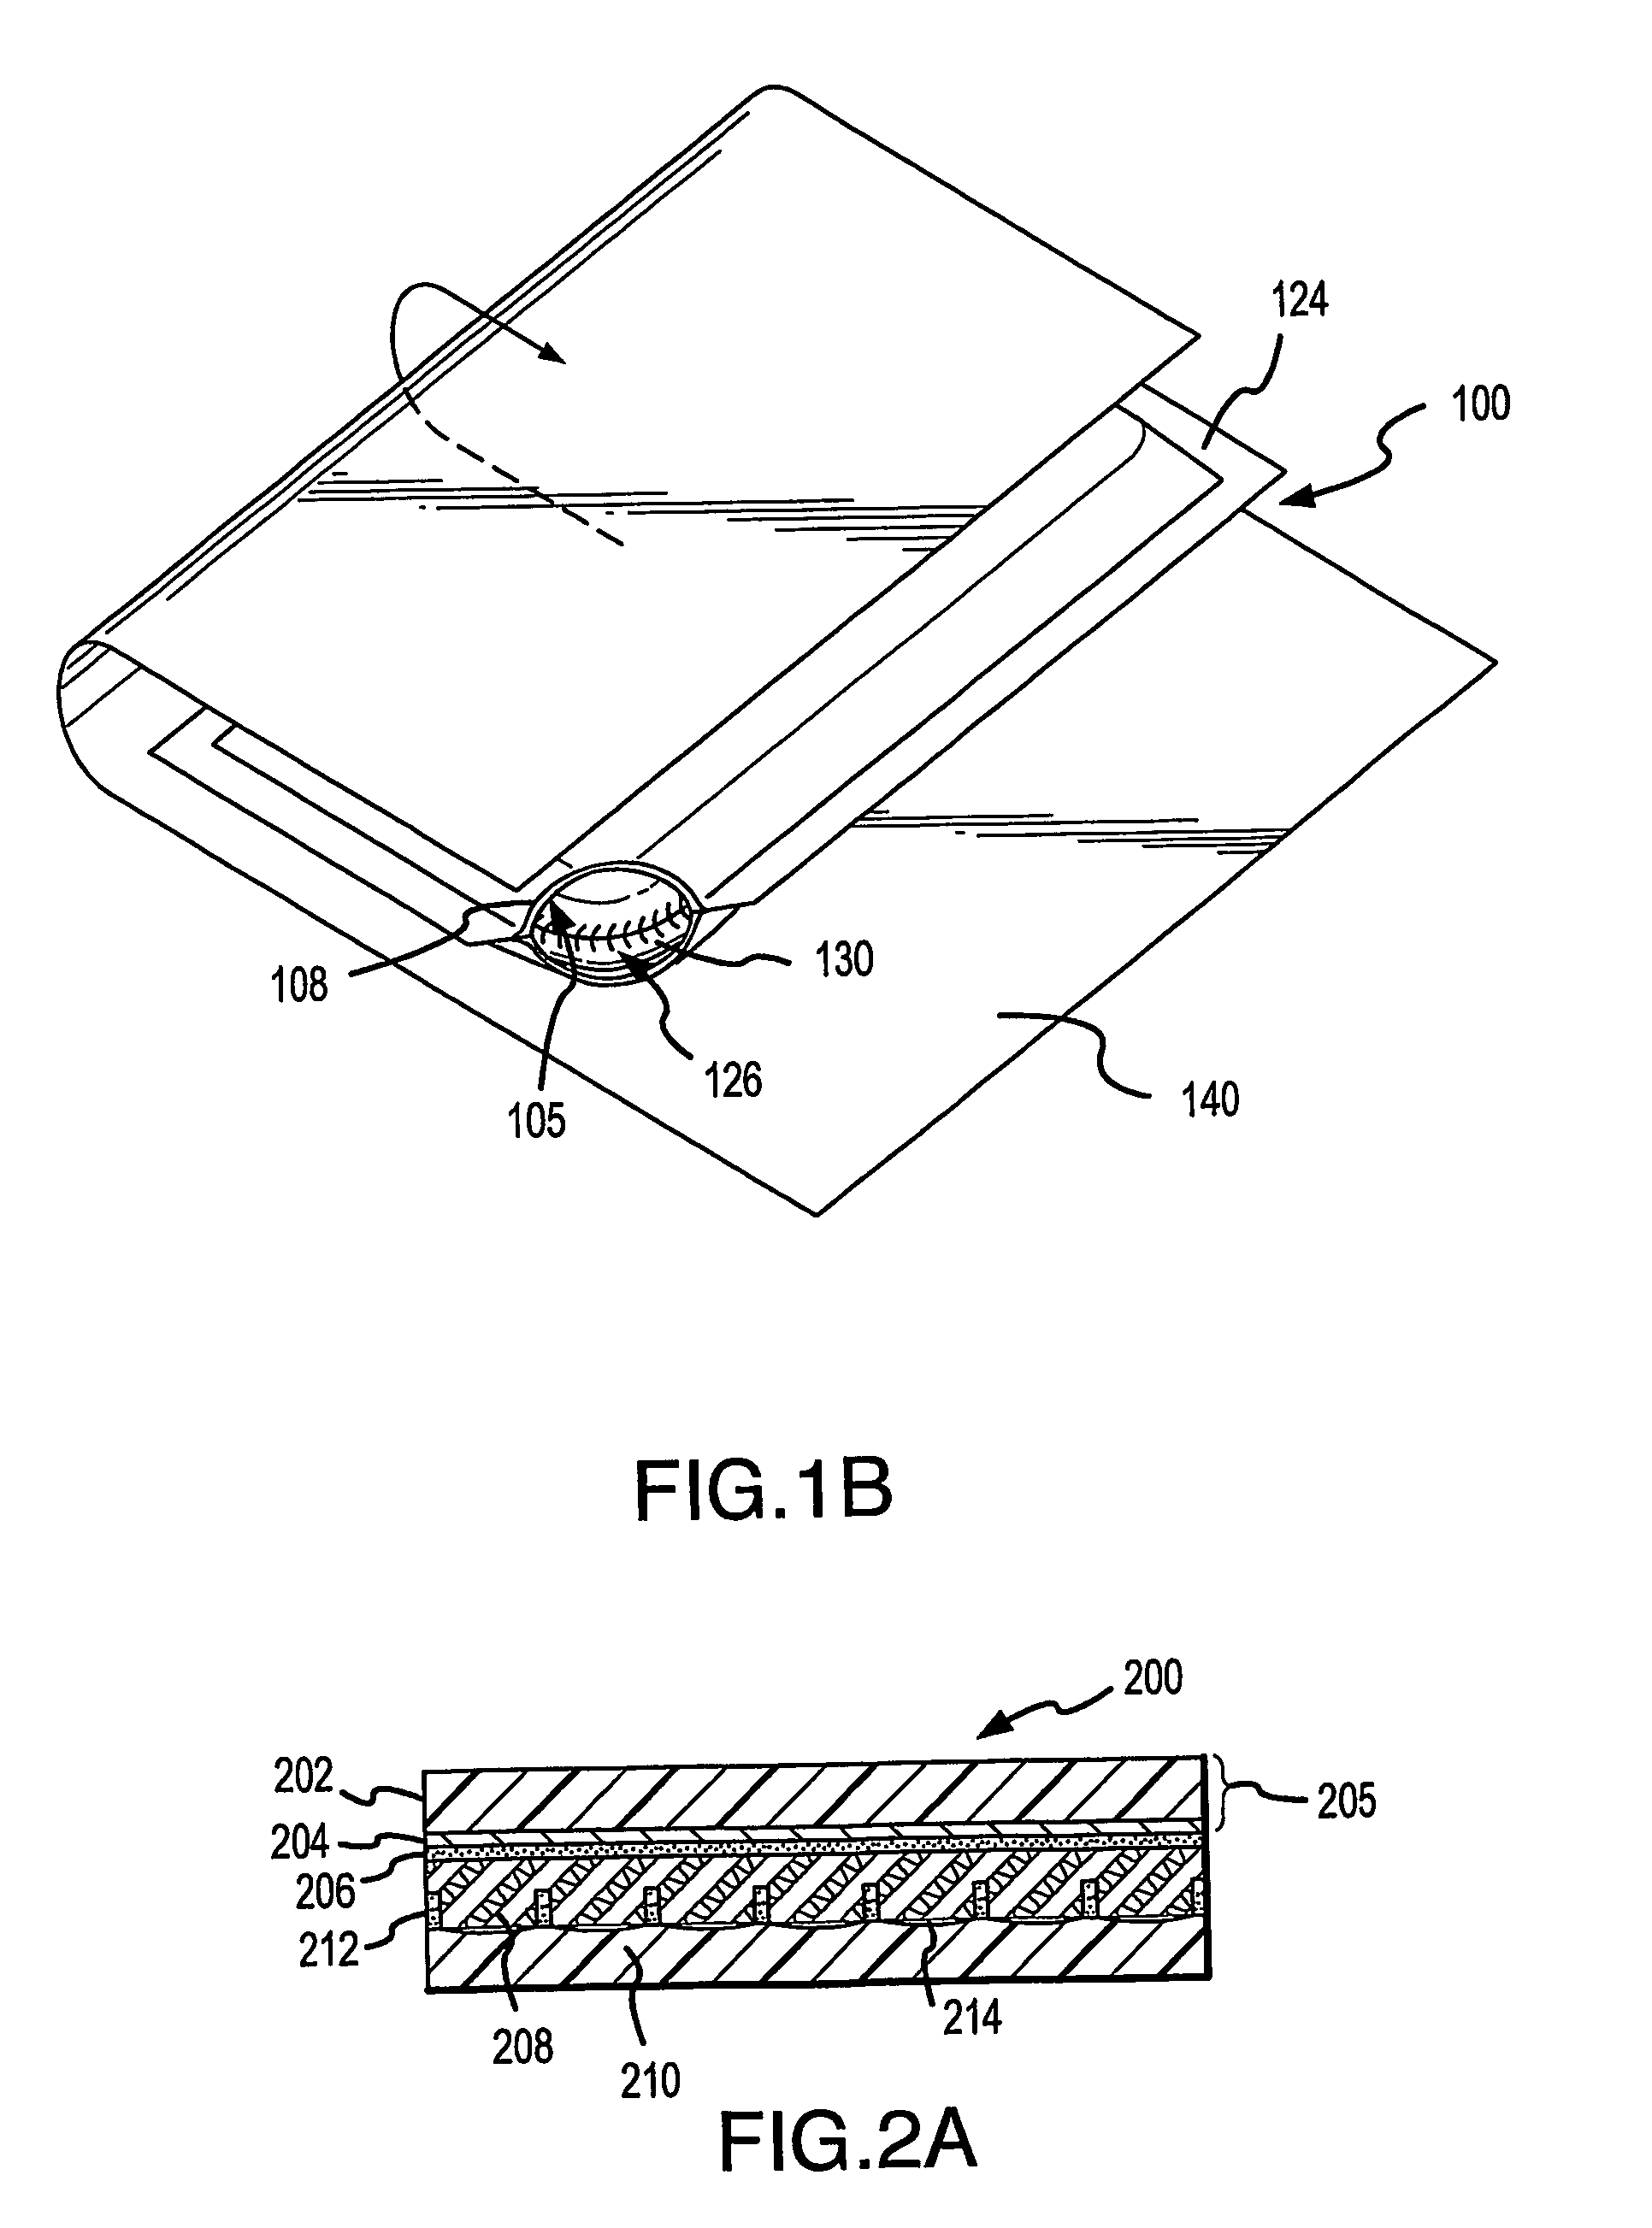 Insulating microwave interactive packaging